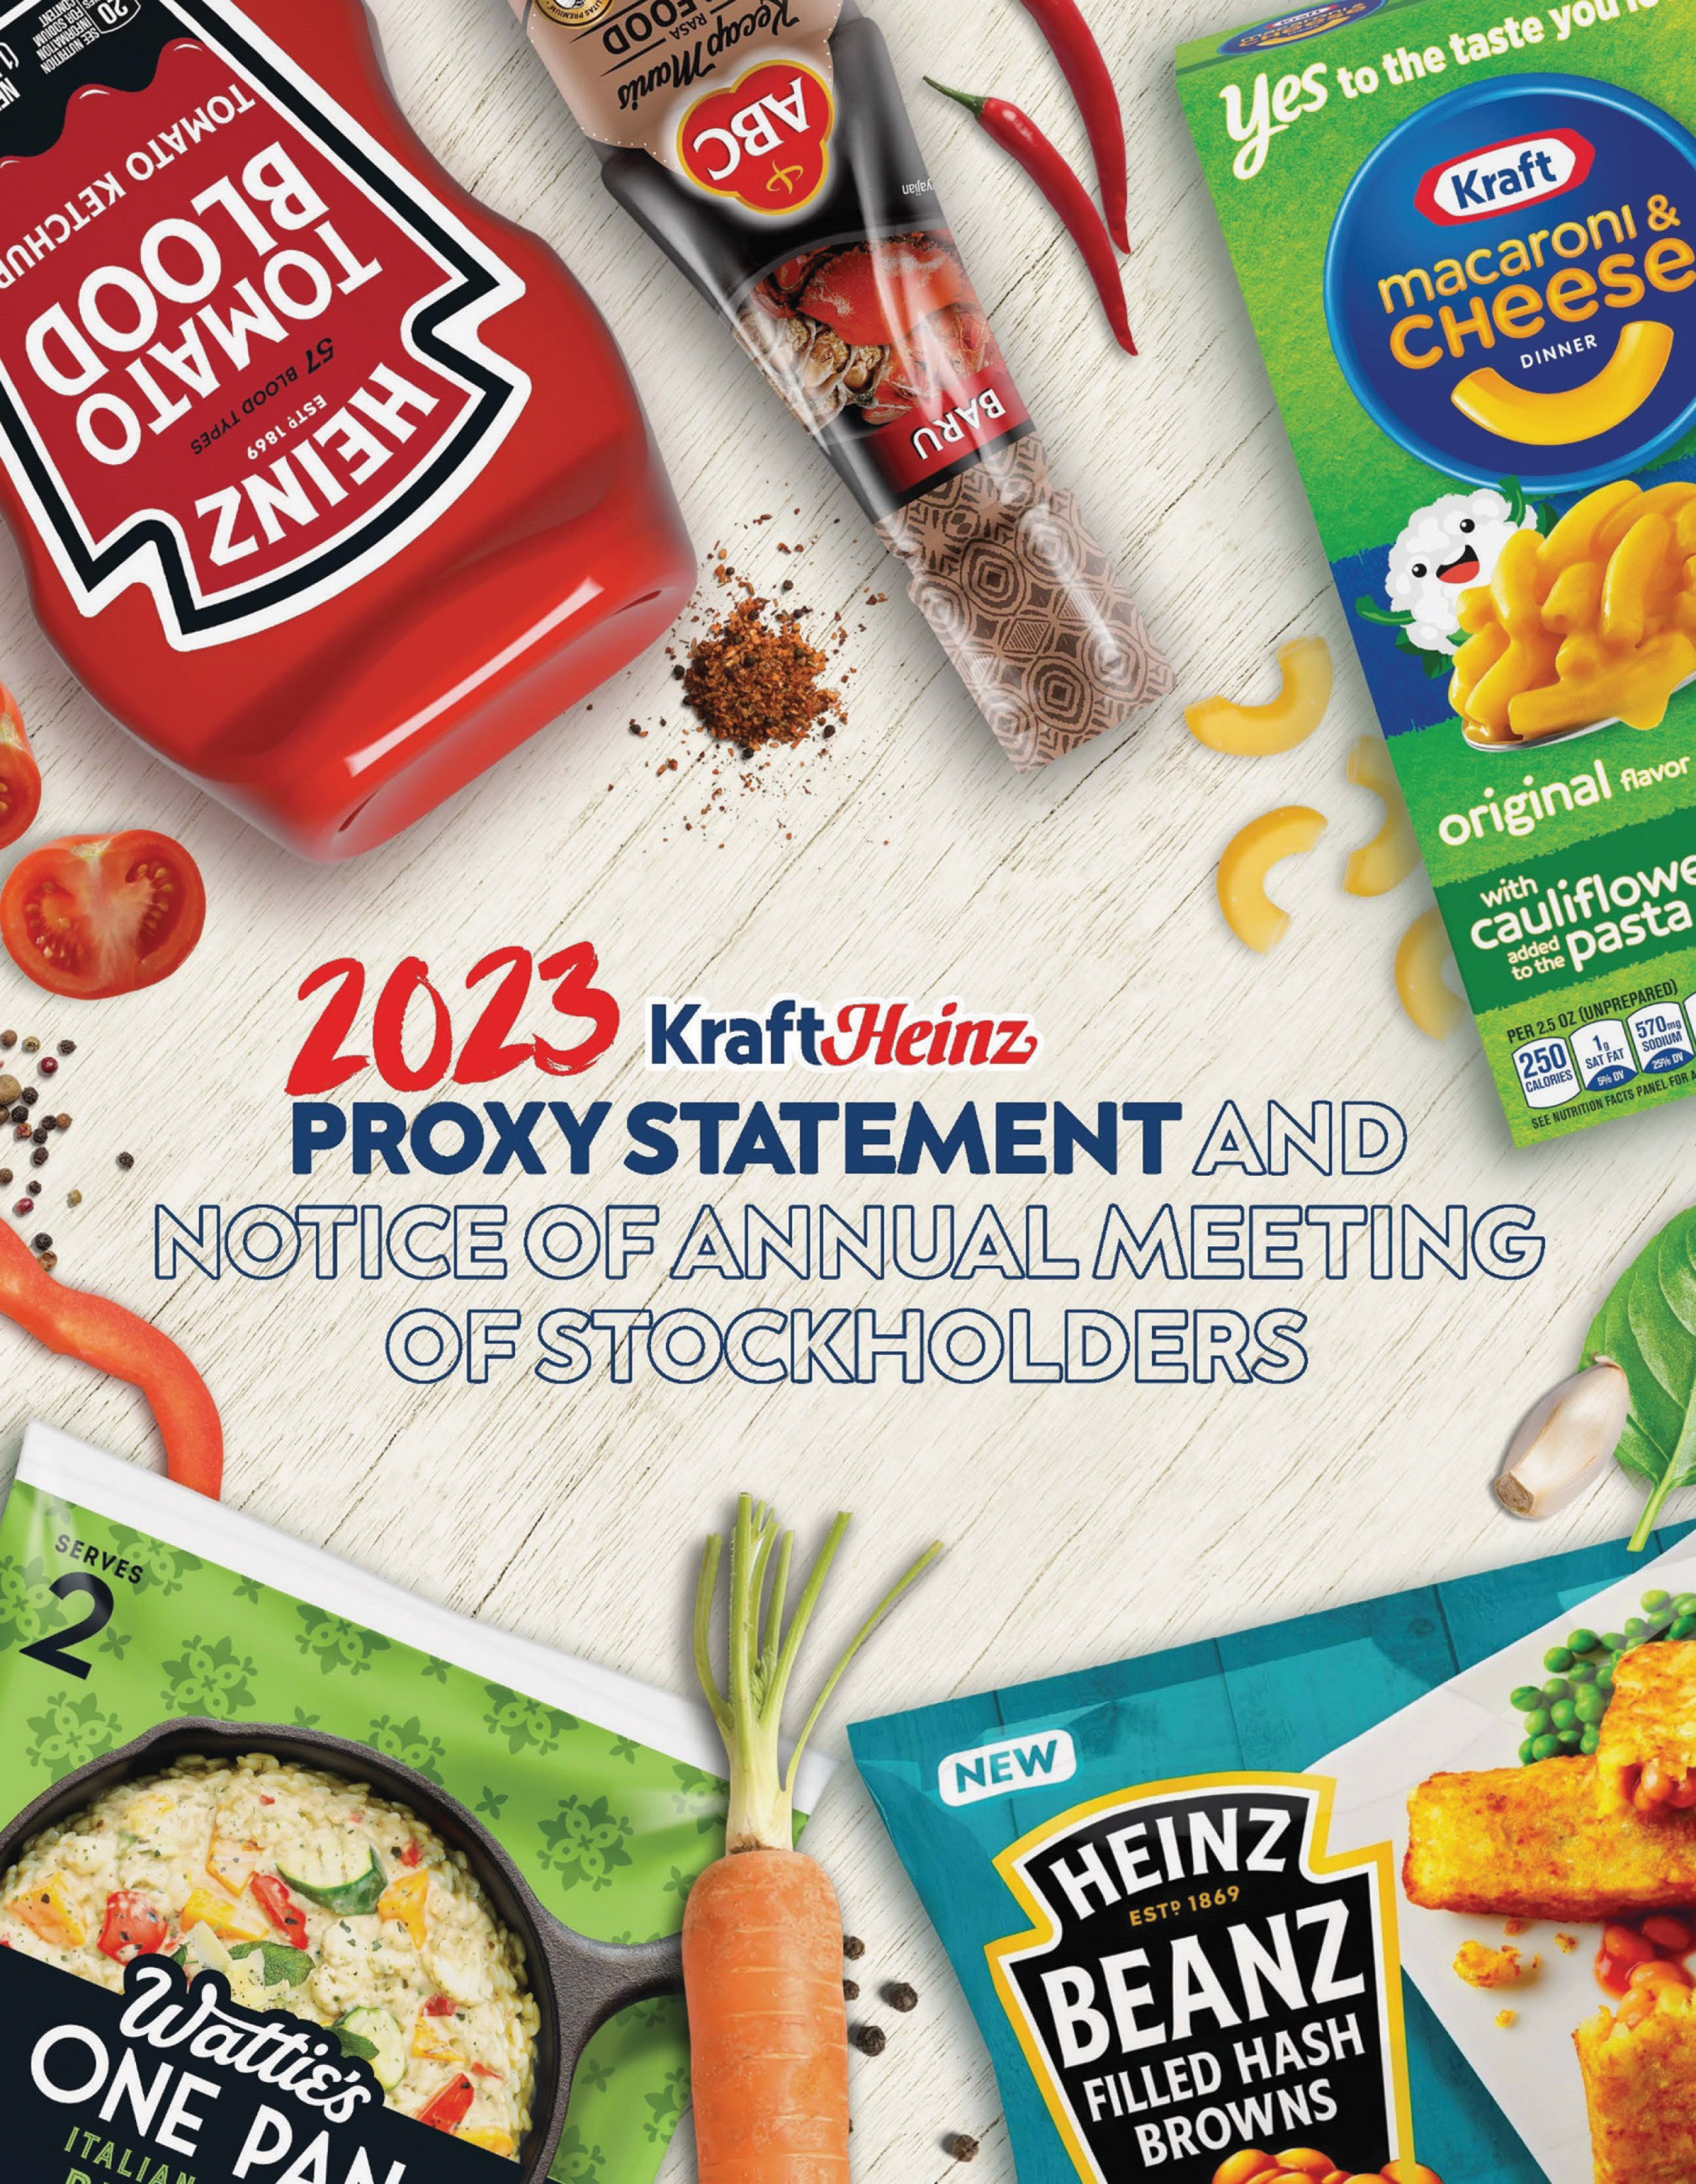 Johnson's® New 100% Ingredient Transparency Disclosure for Its